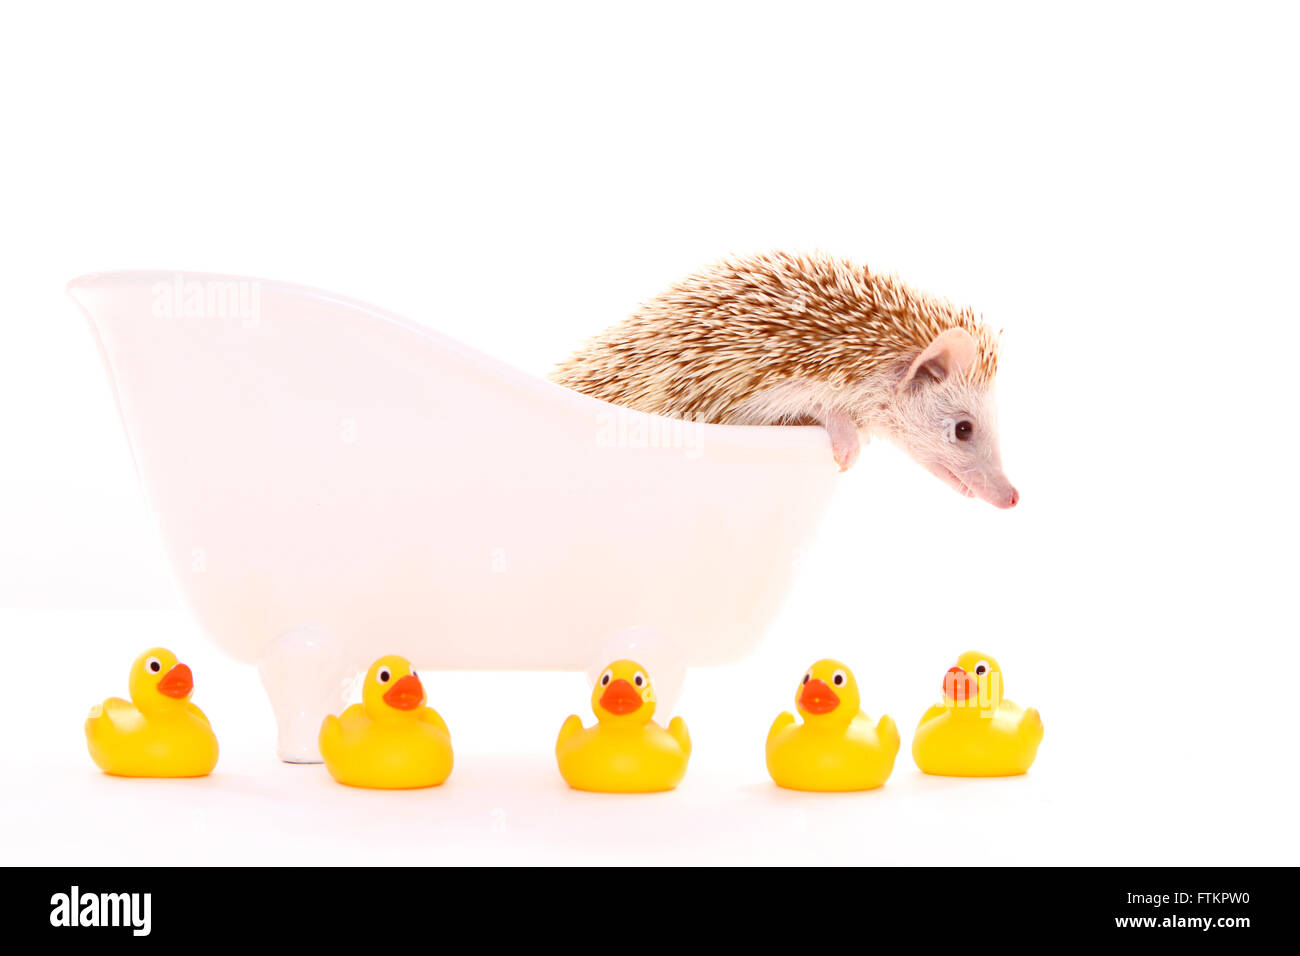 Four-toed Hedgehog, African Pygmy Hedgehog (Atelerix albiventris). Male climbing out from a bath tub. Studio picture against a white background. Germany Stock Photo